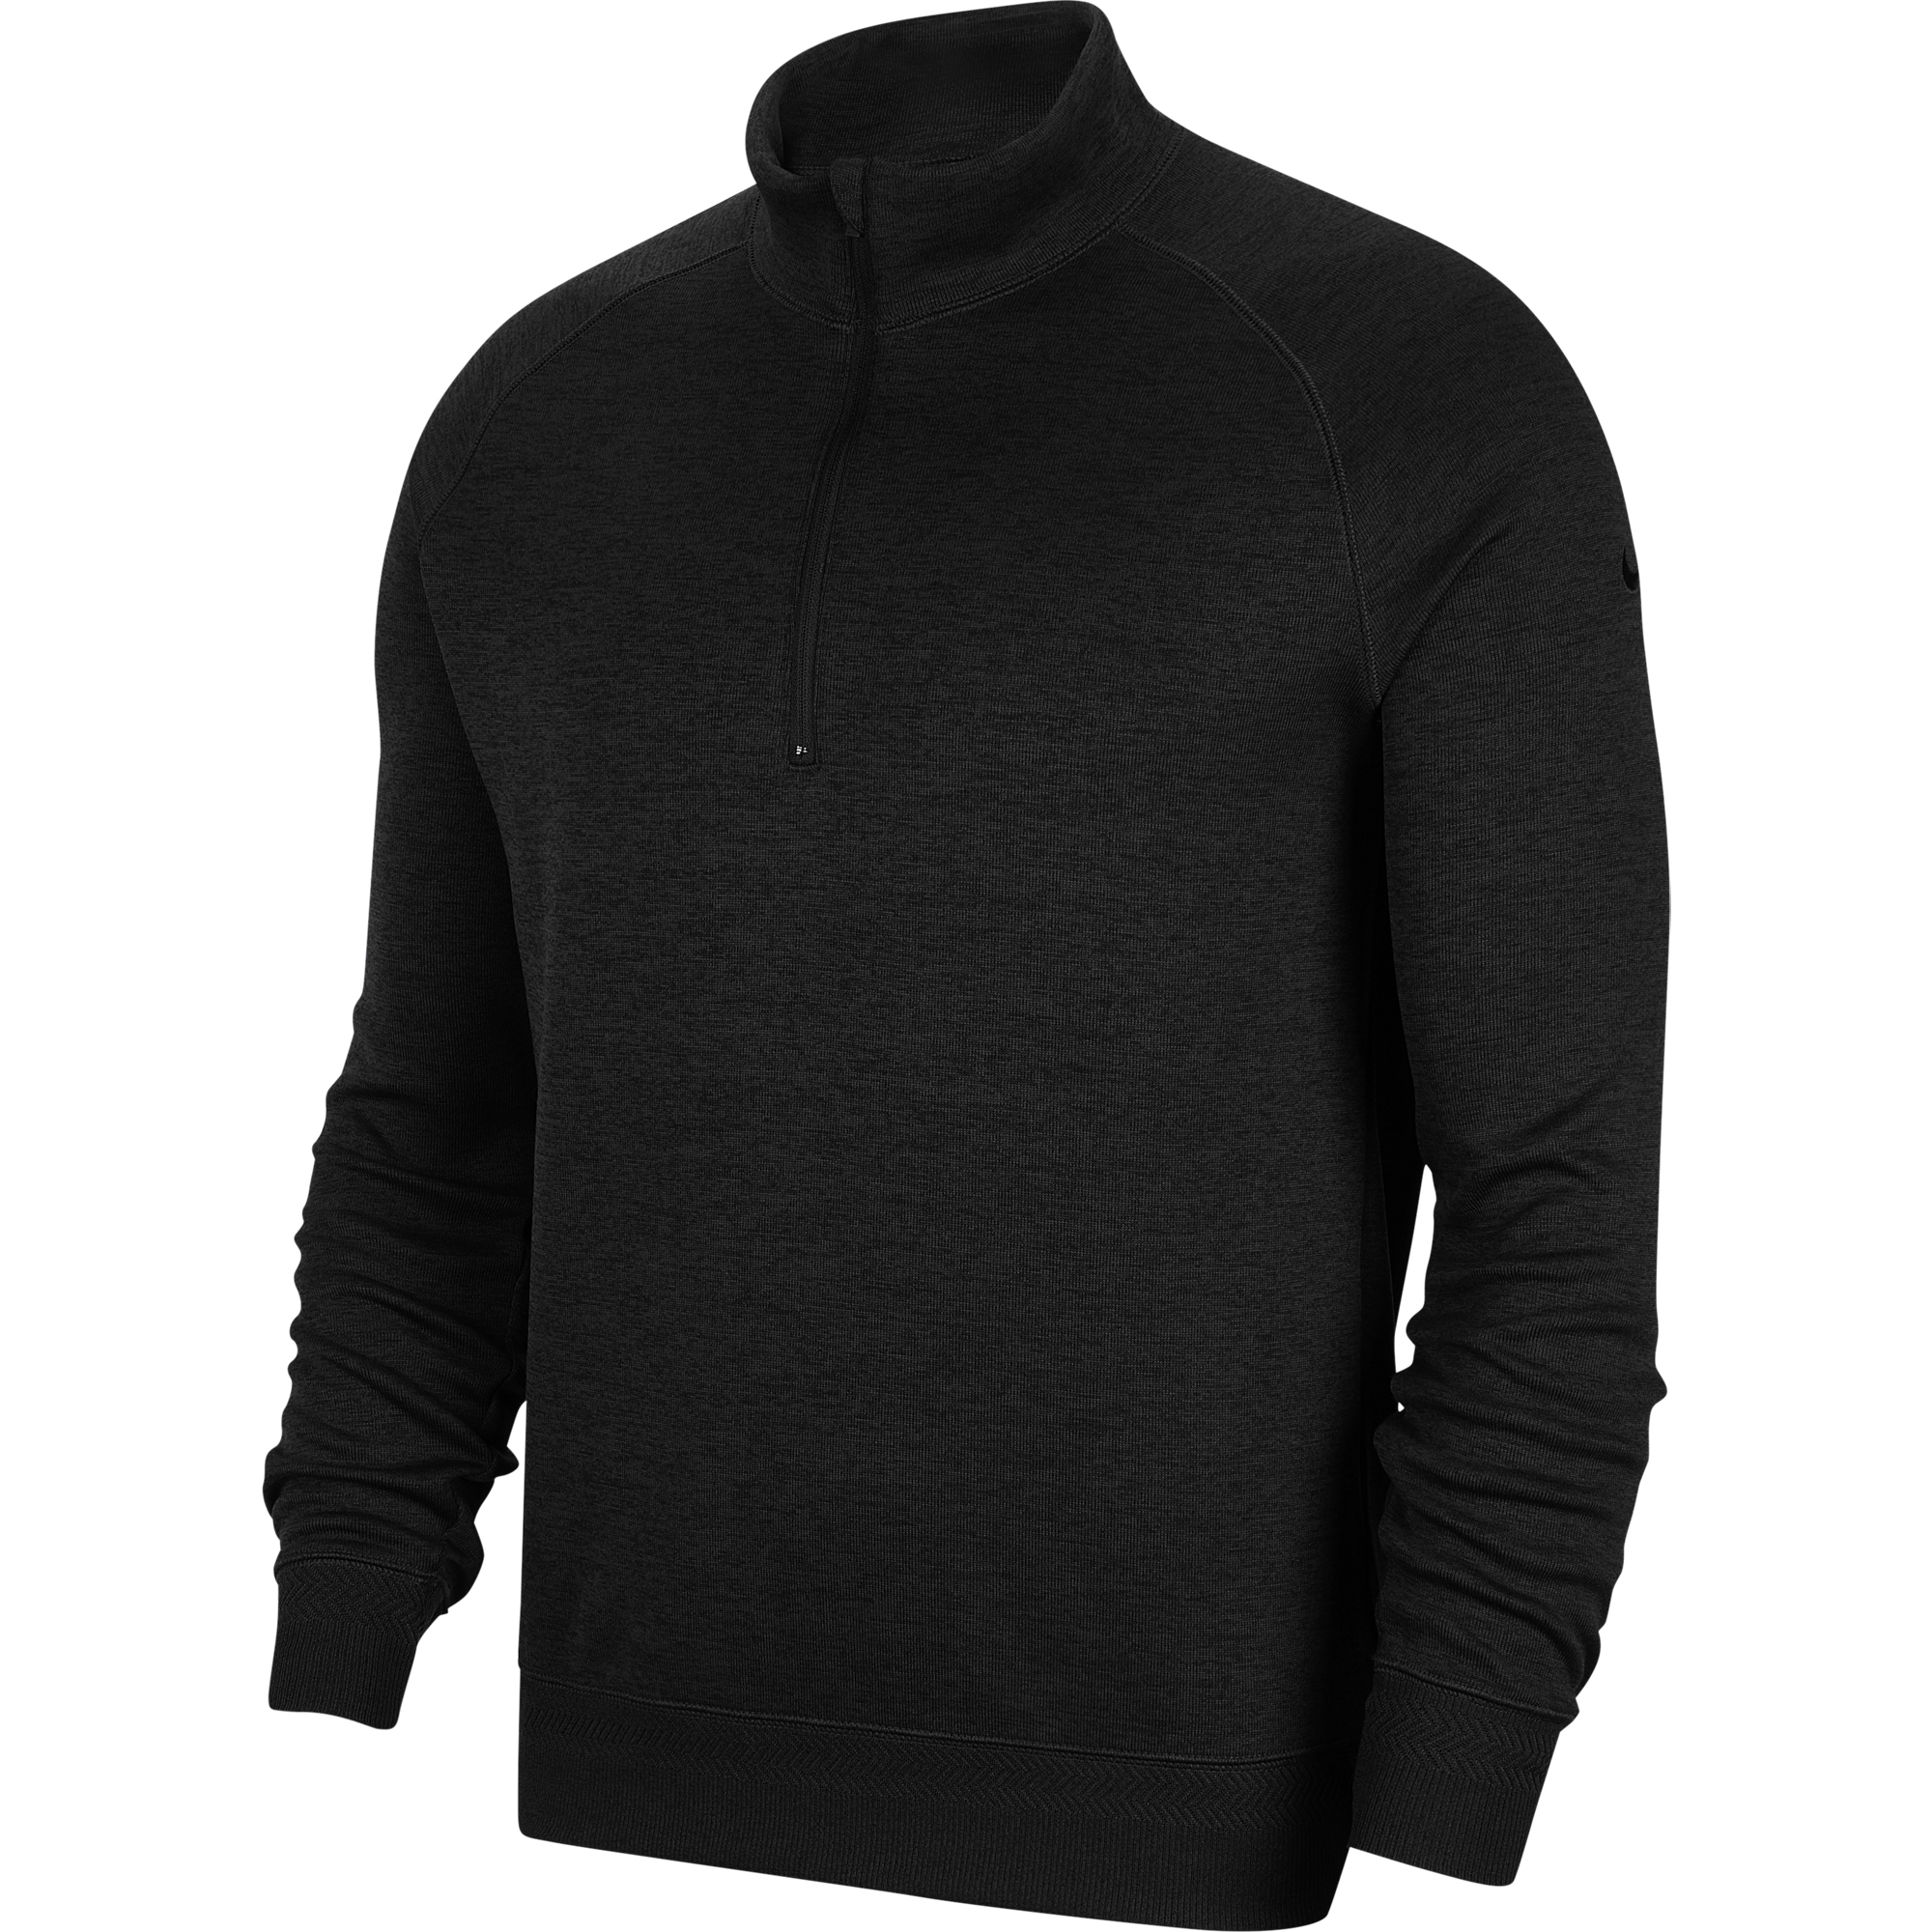 Nike Mens Dry Fit Players Half Zip Wicking Golf Sweater M- Chest 37.5-41’